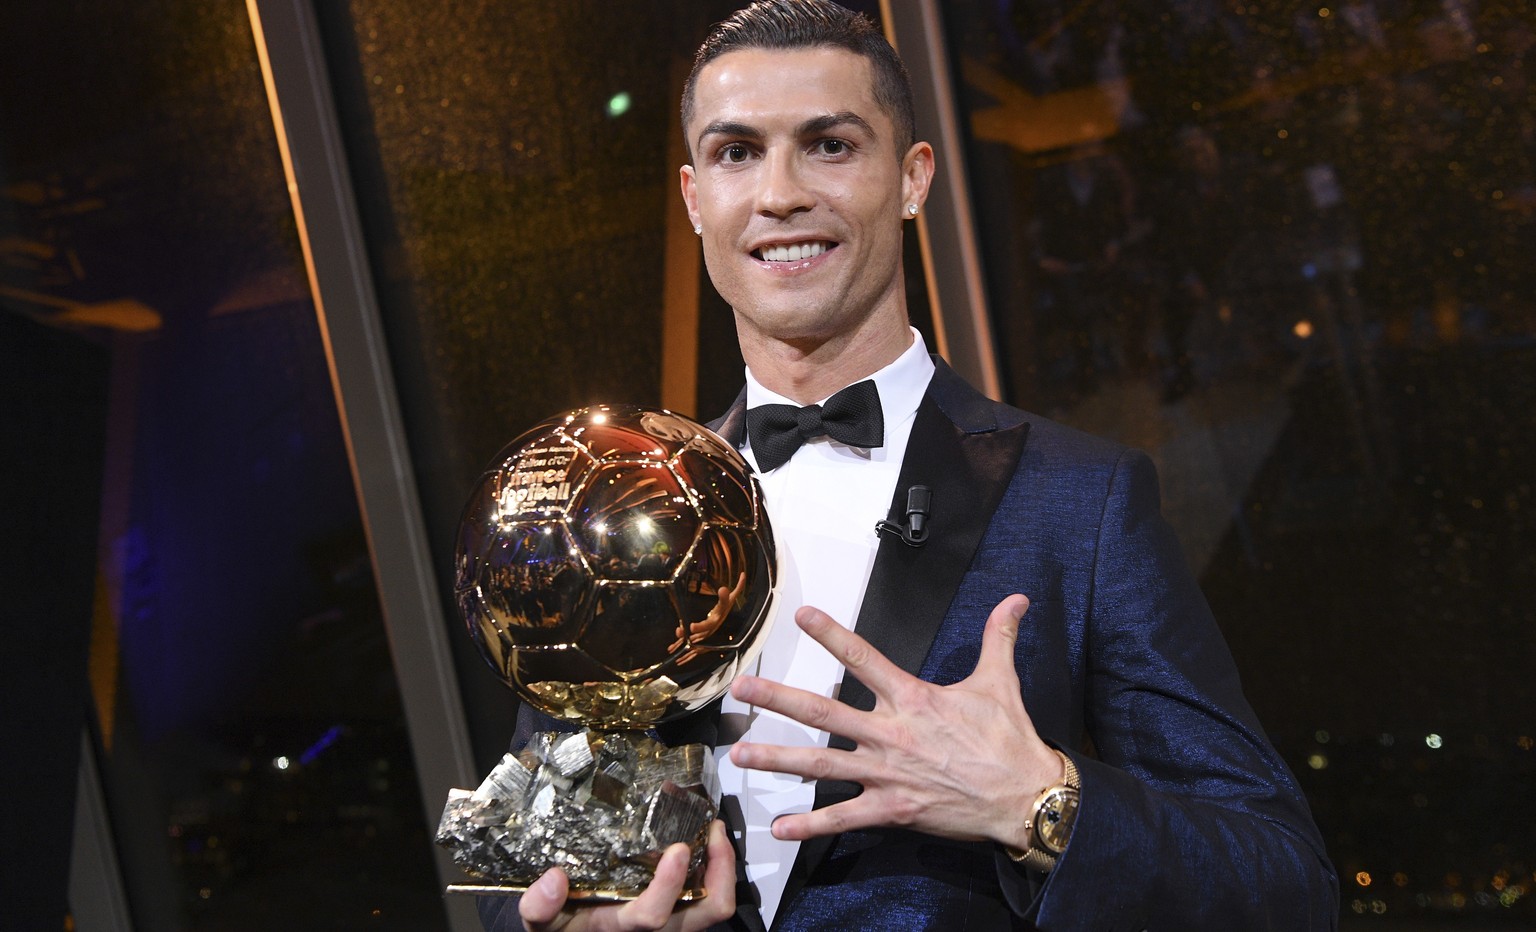 This image provided by L&#039;Equipe Friday Dec.8, 2017 shows Portuguese soccer player Christiano Ronaldo holding the Ballon d&#039; Or (Golden Ball) he received Thursday Dec.7, 2017 in Paris. A decad ...